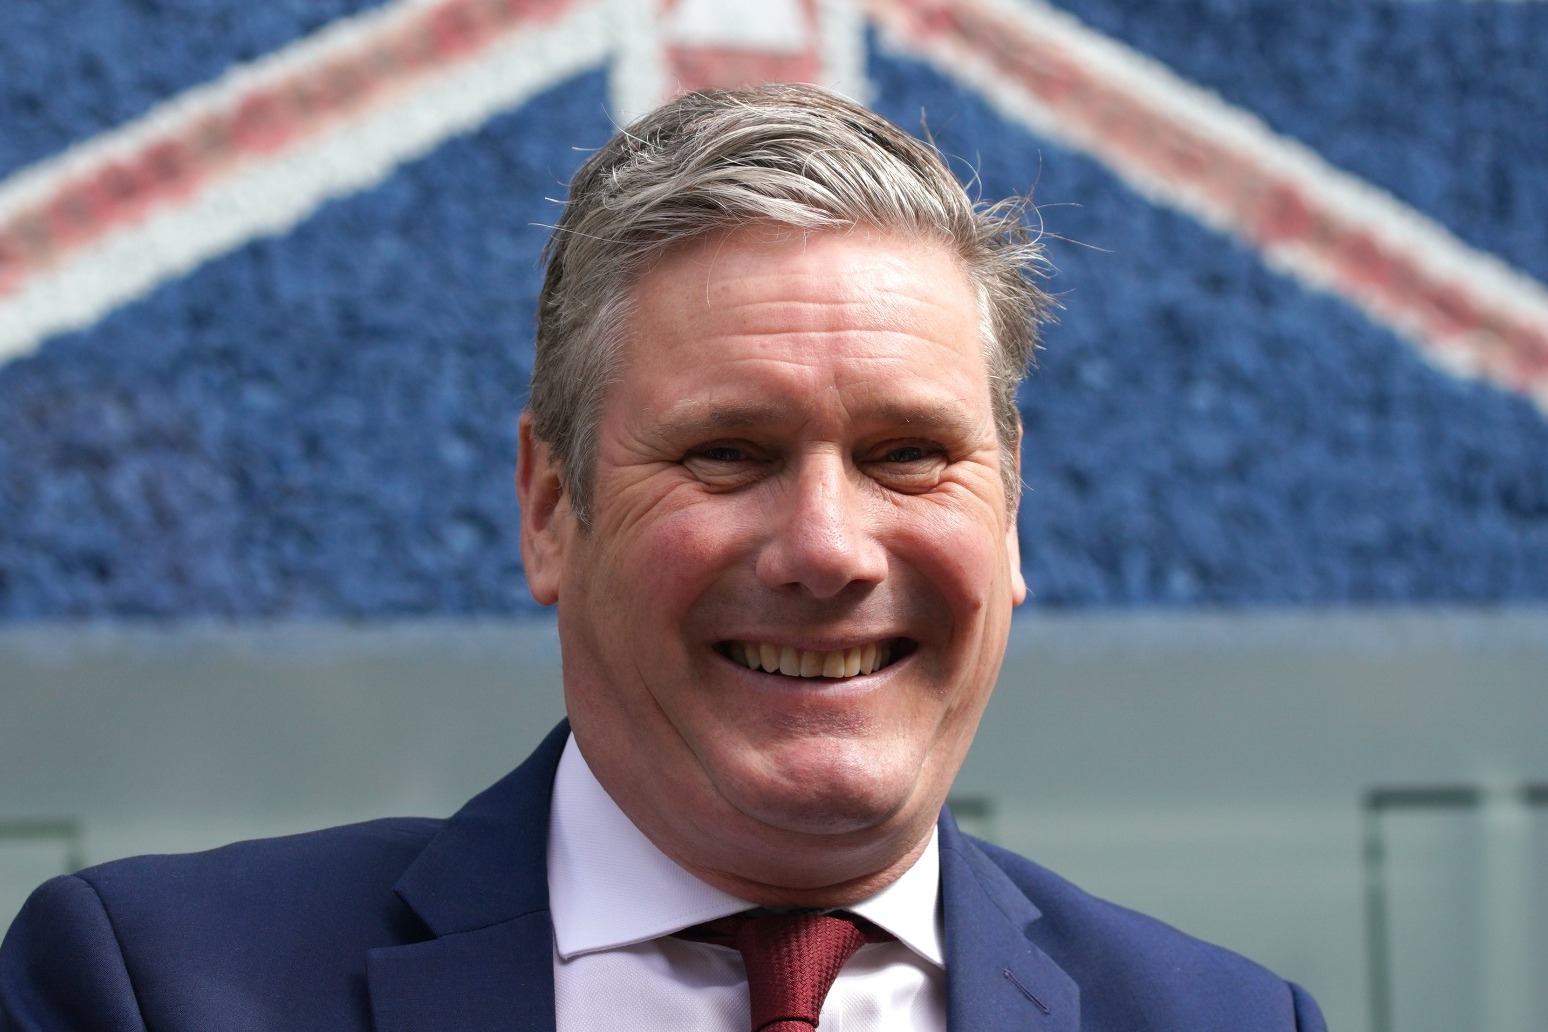 ‘No problem here’ insists Starmer, as standards watchdog opens investigation 